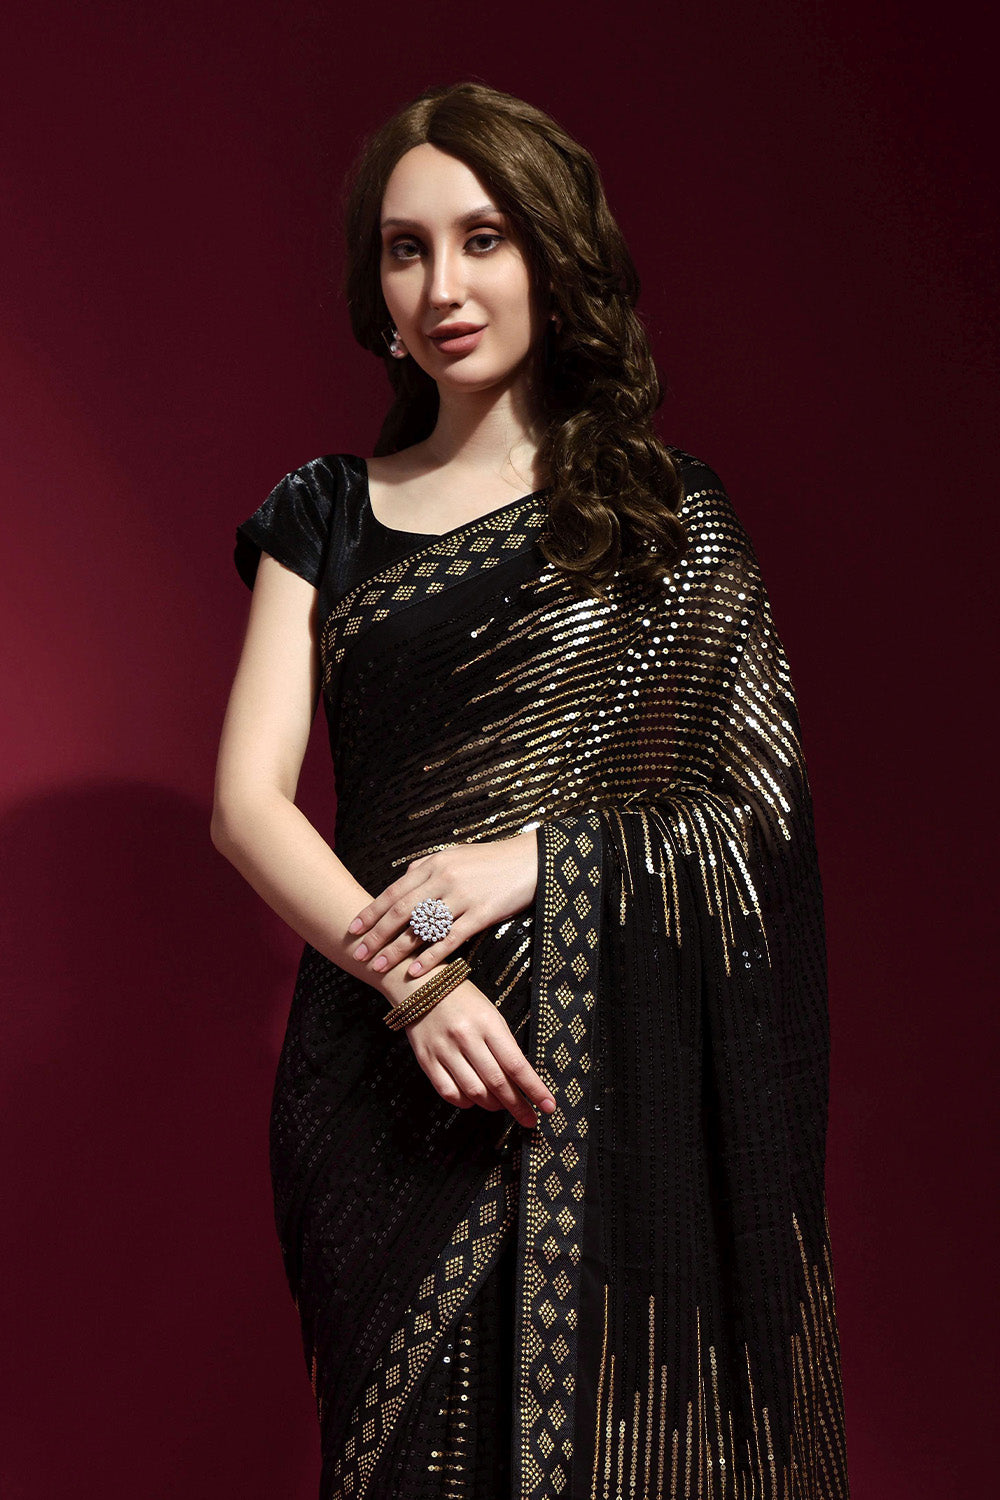 Black and Gold Georgette Saree With Blouse Piece